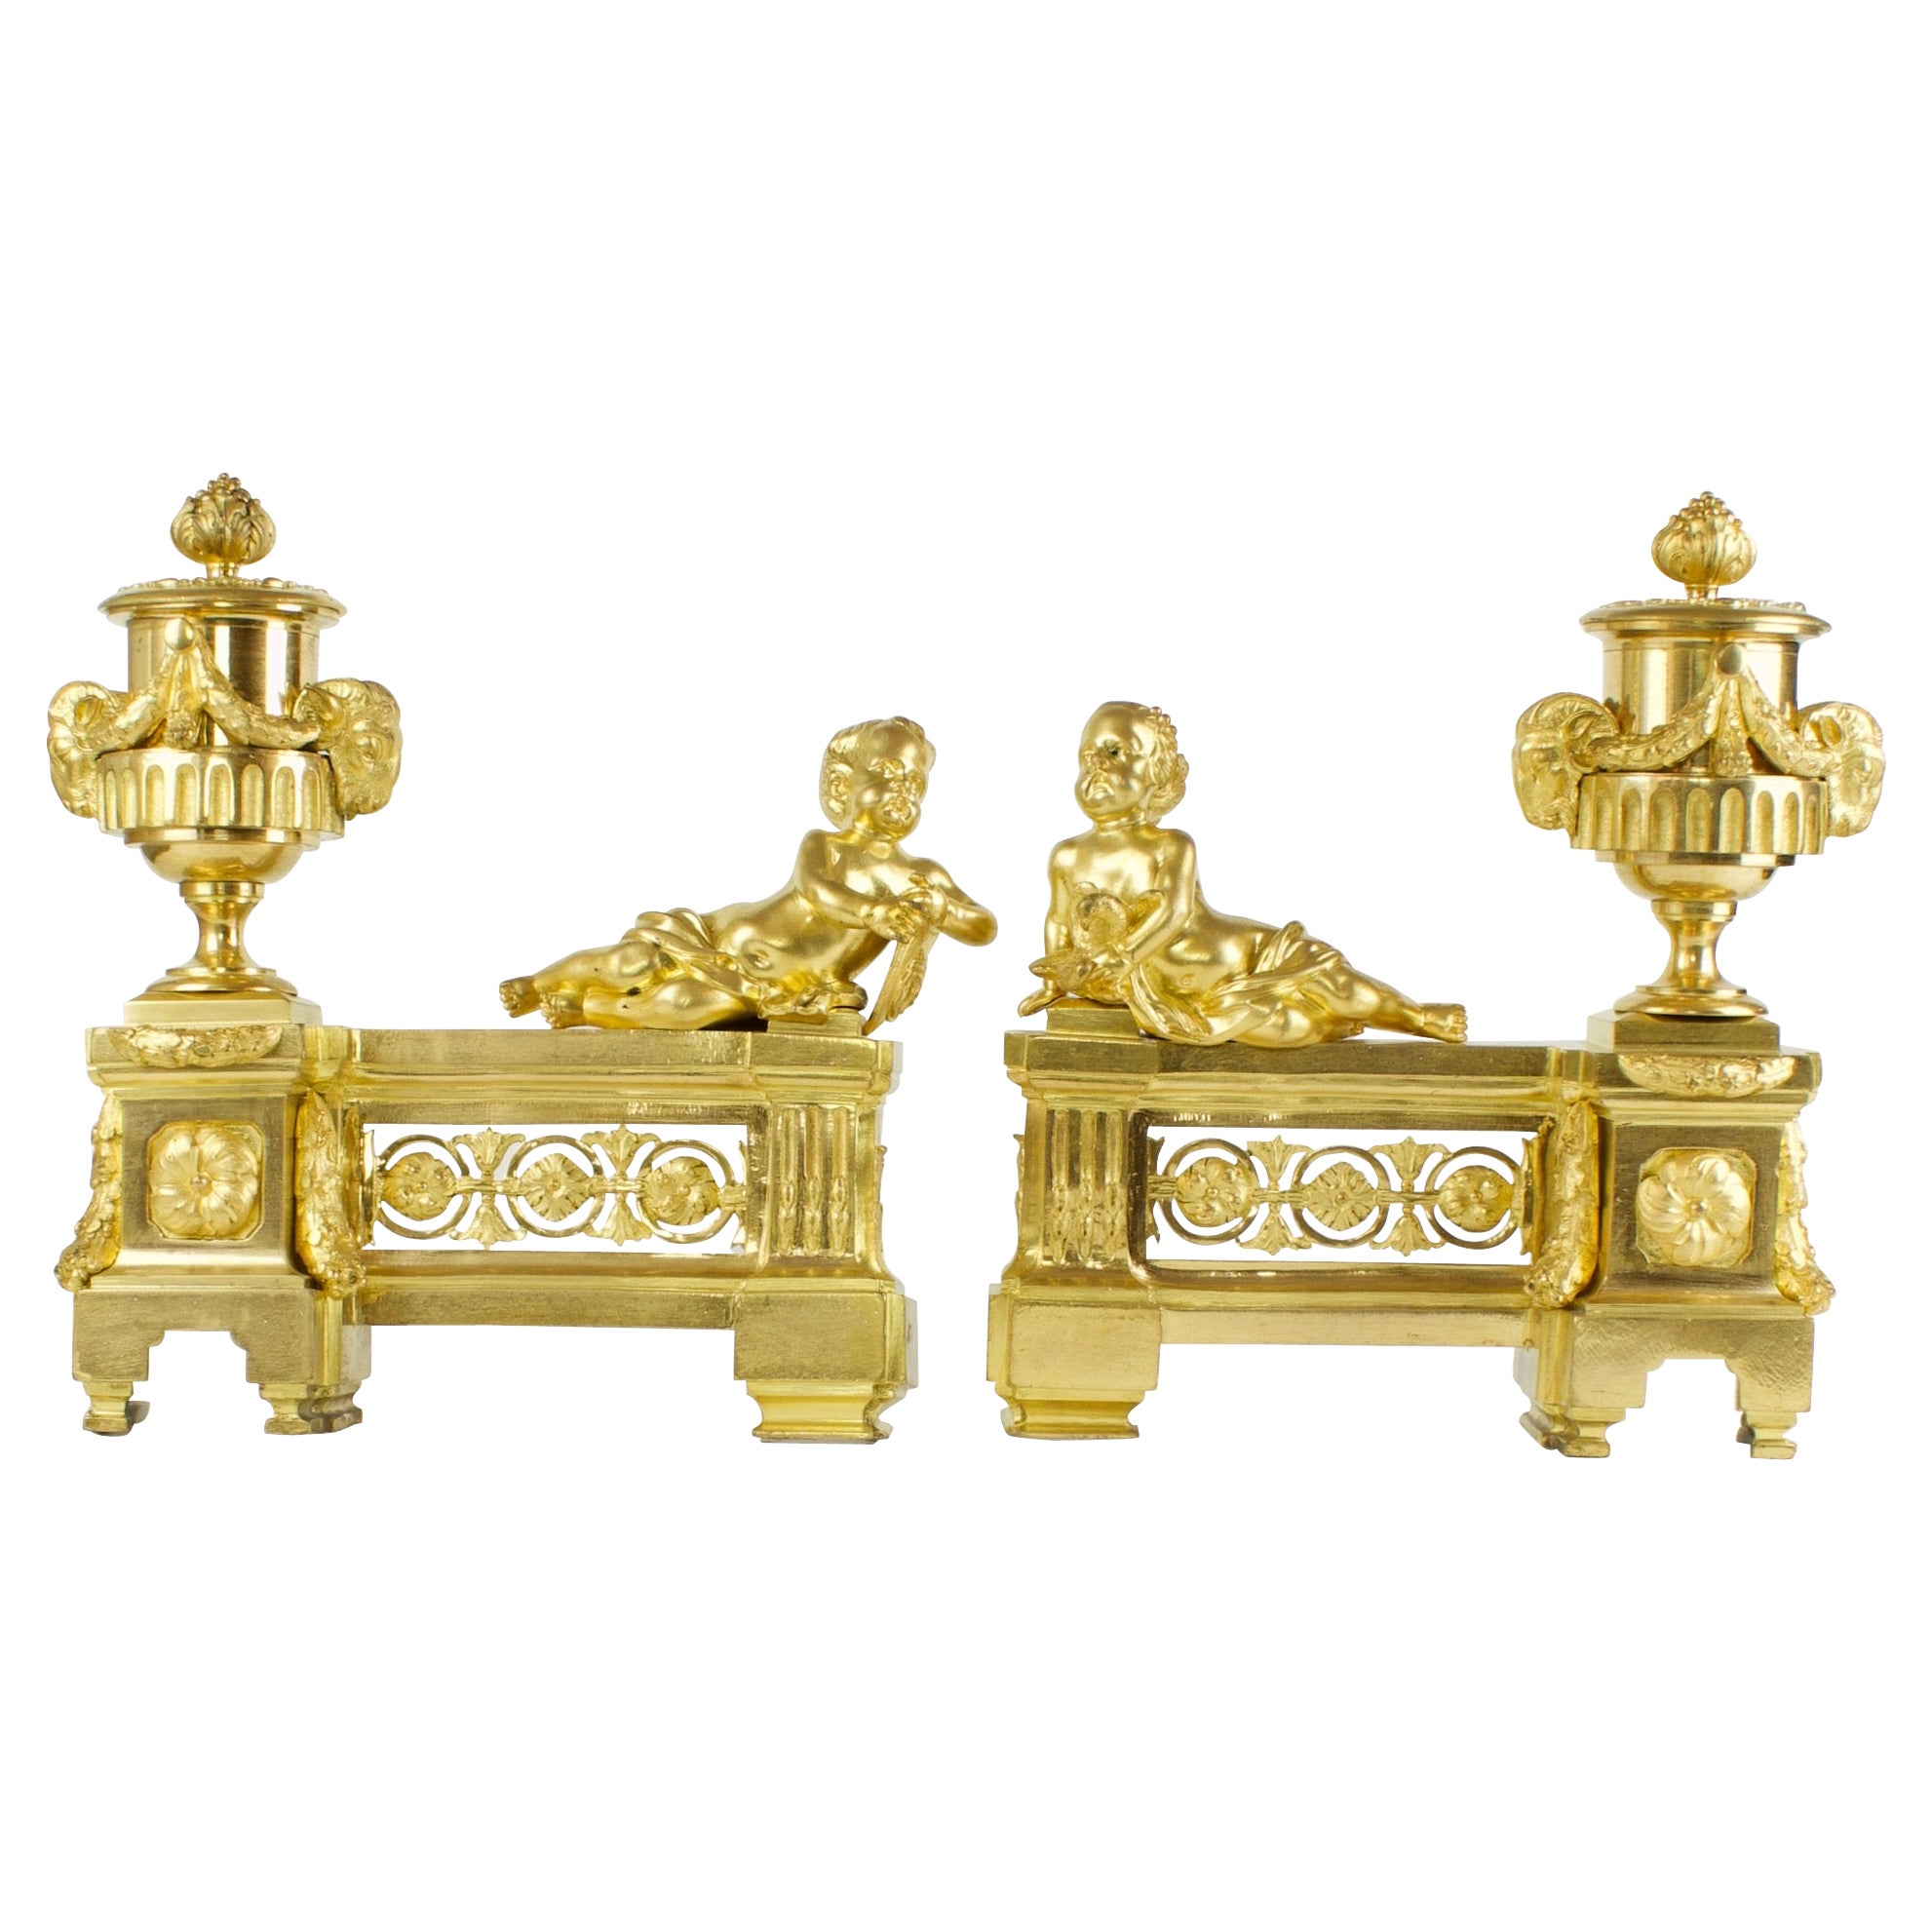 Pair of 18th Century Louis XVI Ormolu Firedogs / Andirons or Chenets with Putti